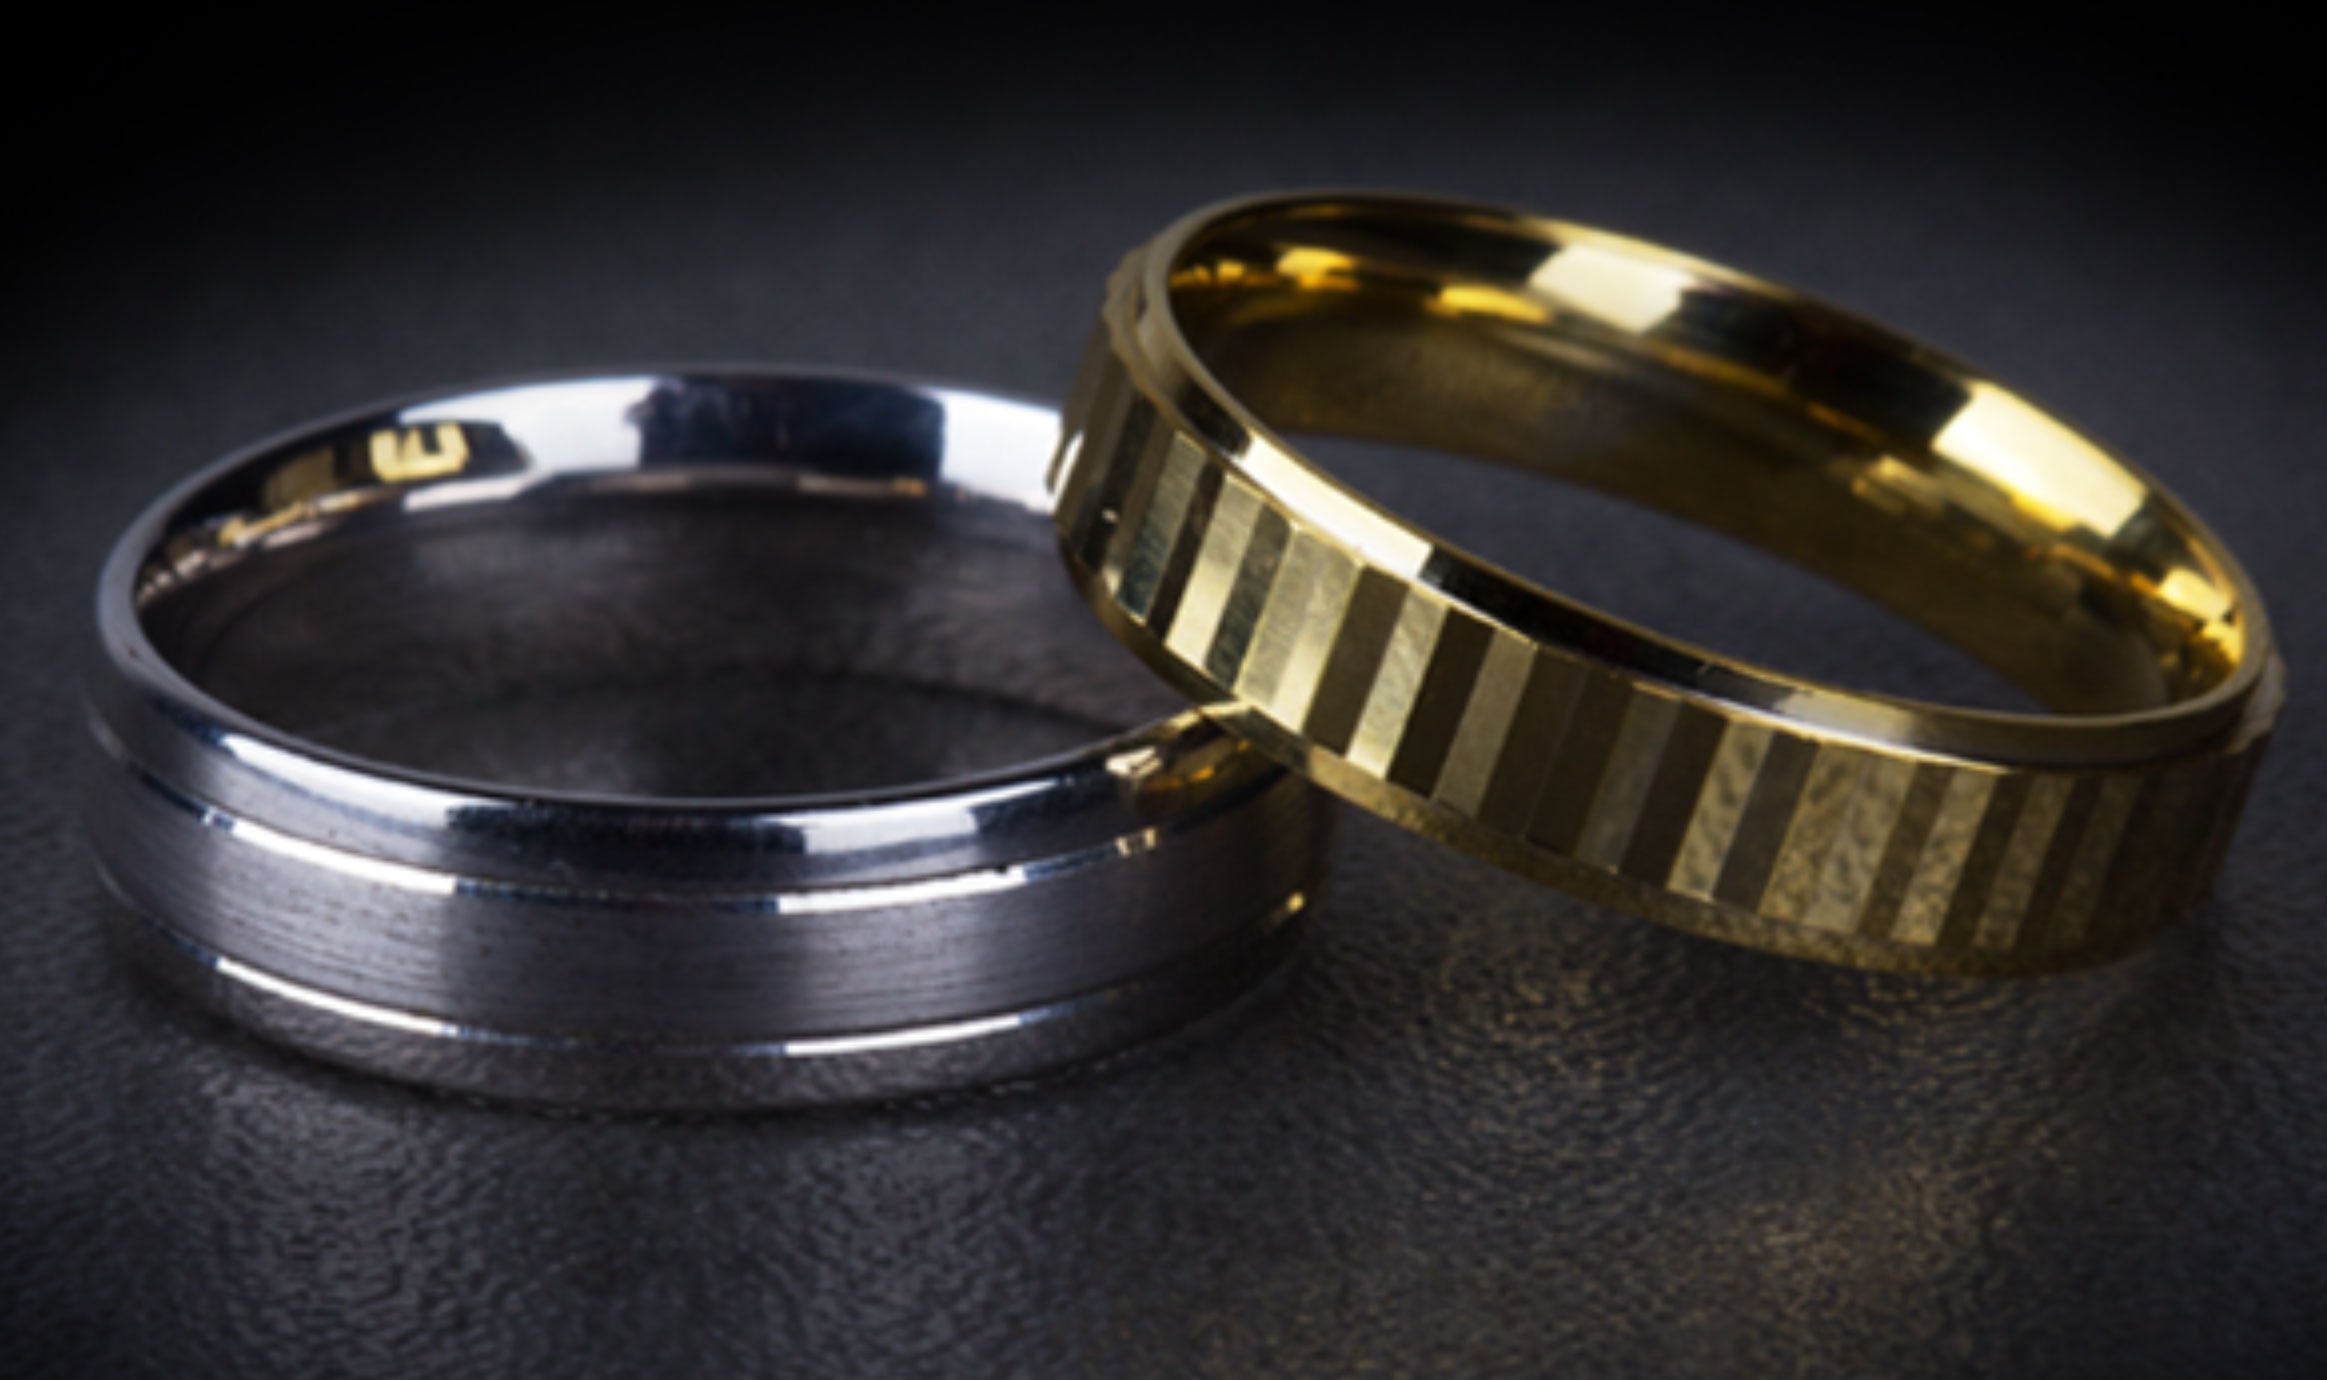 Men’s Wedding Bands: Should You Choose Yellow Gold, White Gold or Platinum?